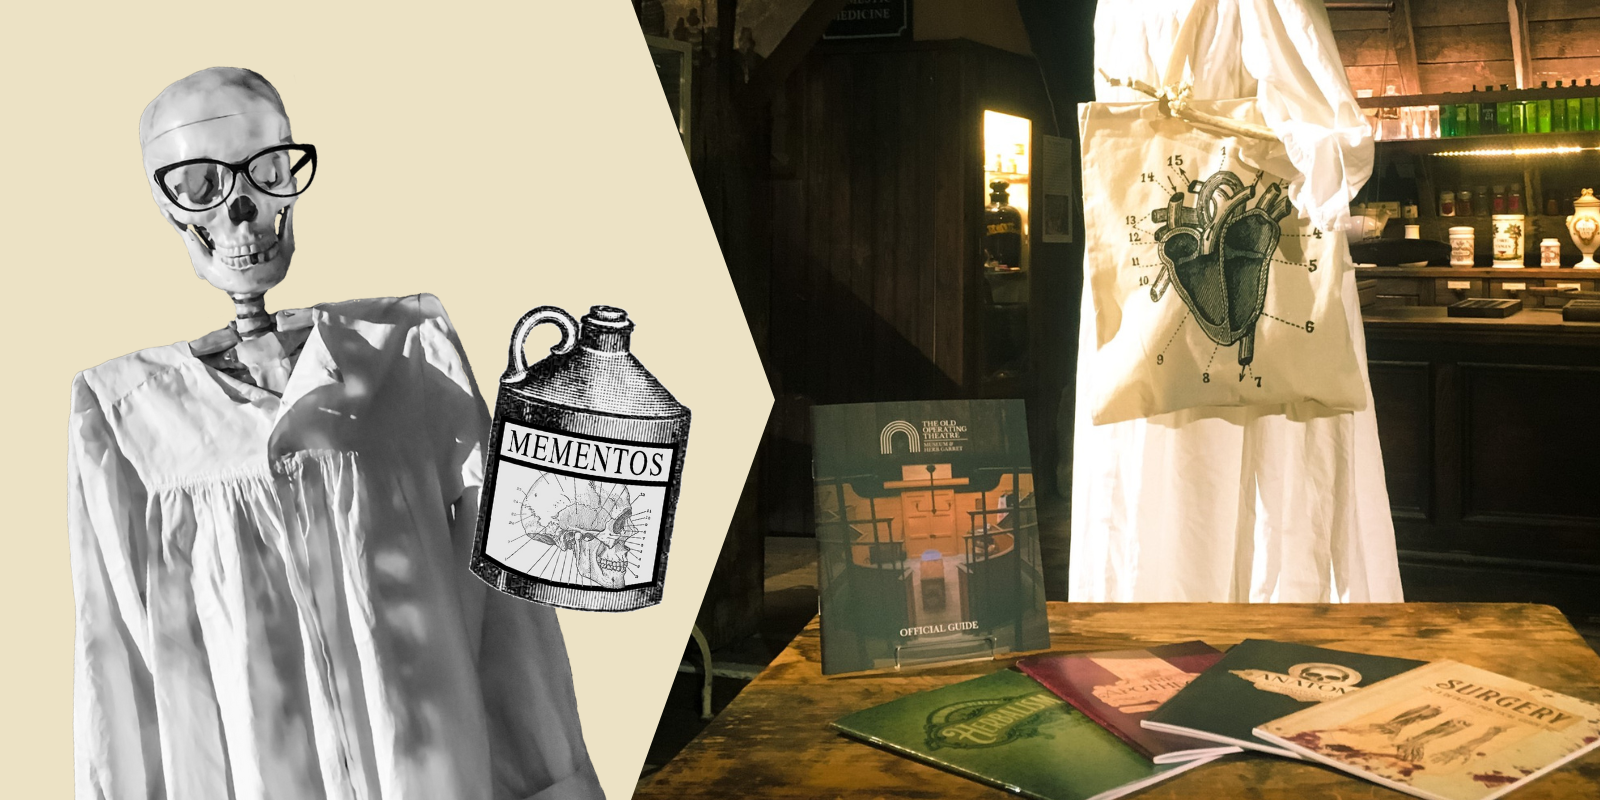 Left: a cut-out black-and-white photo of a skeleton wearing glasses and a gown, next to an illustrated bottle labelled Mementos. Right: a colour photo of notebooks on a wooden table, in front of the skeleton modelling a heart tote bag in the museum